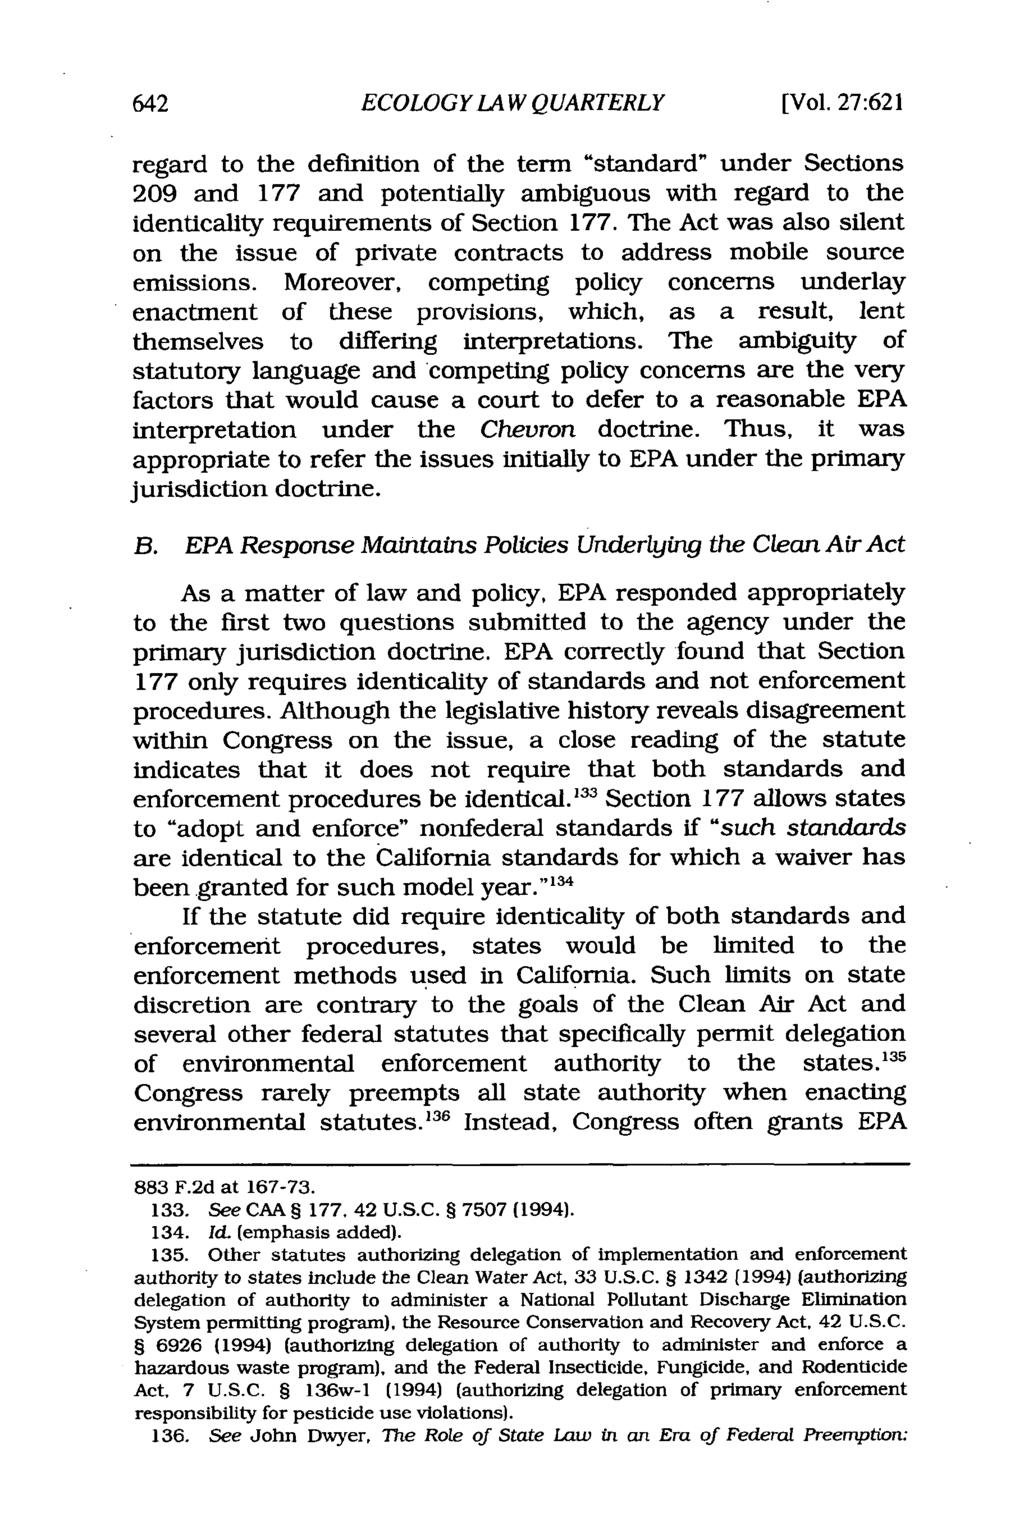 ECOLOGY LAW QUARTERLY [Vol. 27:621 regard to the definition of the term "standard" under Sections 209 and 177 and potentially ambiguous with regard to the identicality requirements of Section 177.